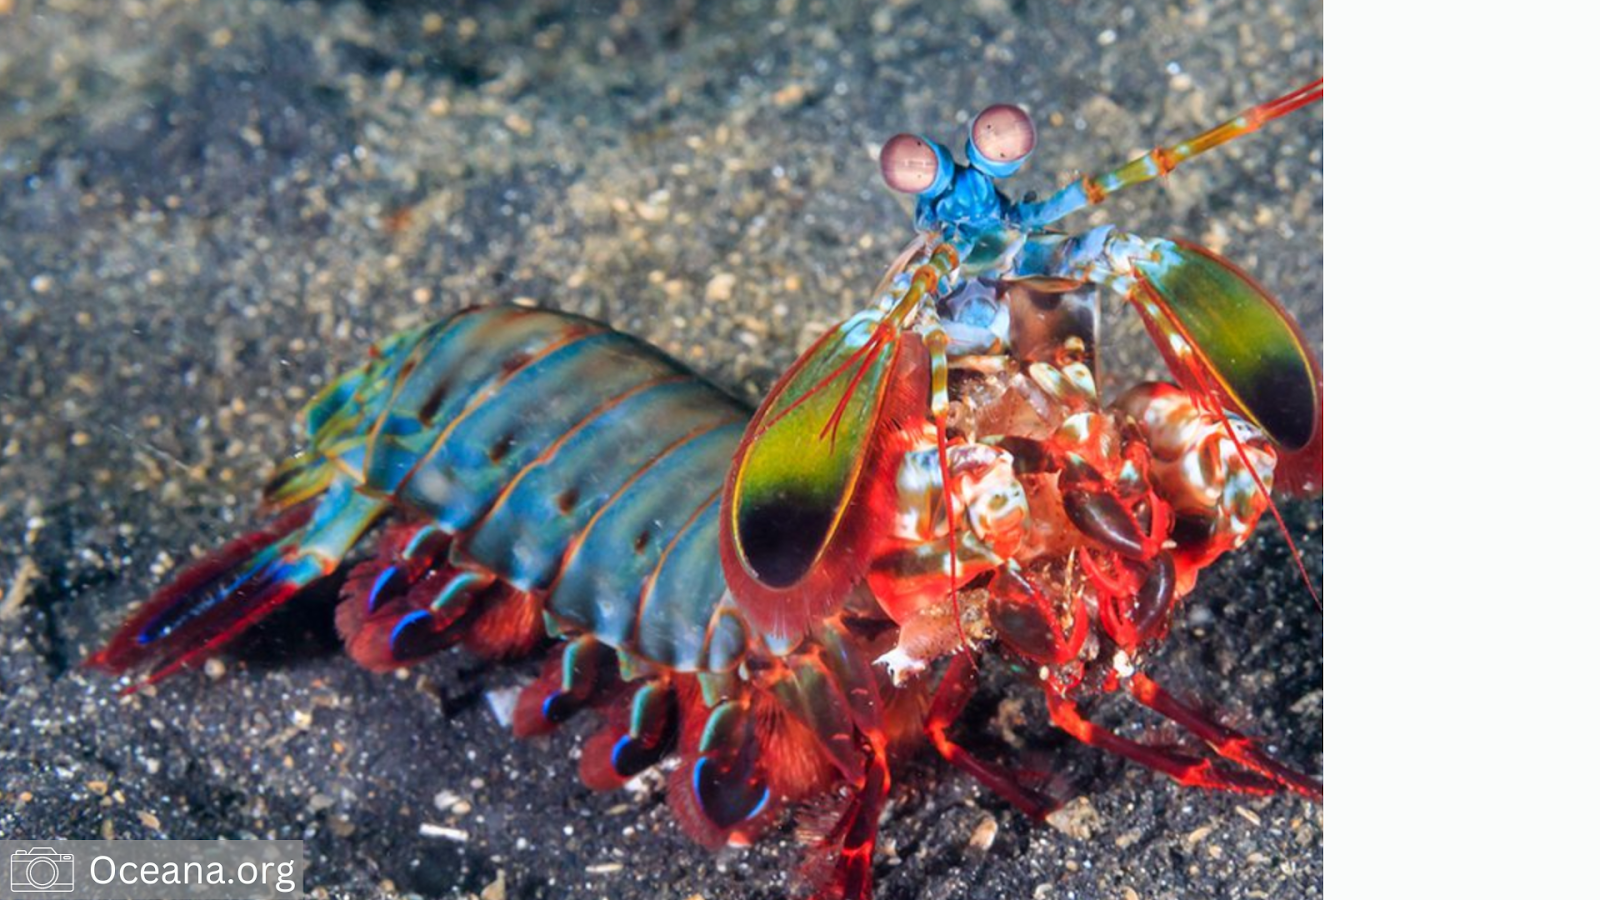 A colorful shrimp on the ground

Description automatically generated